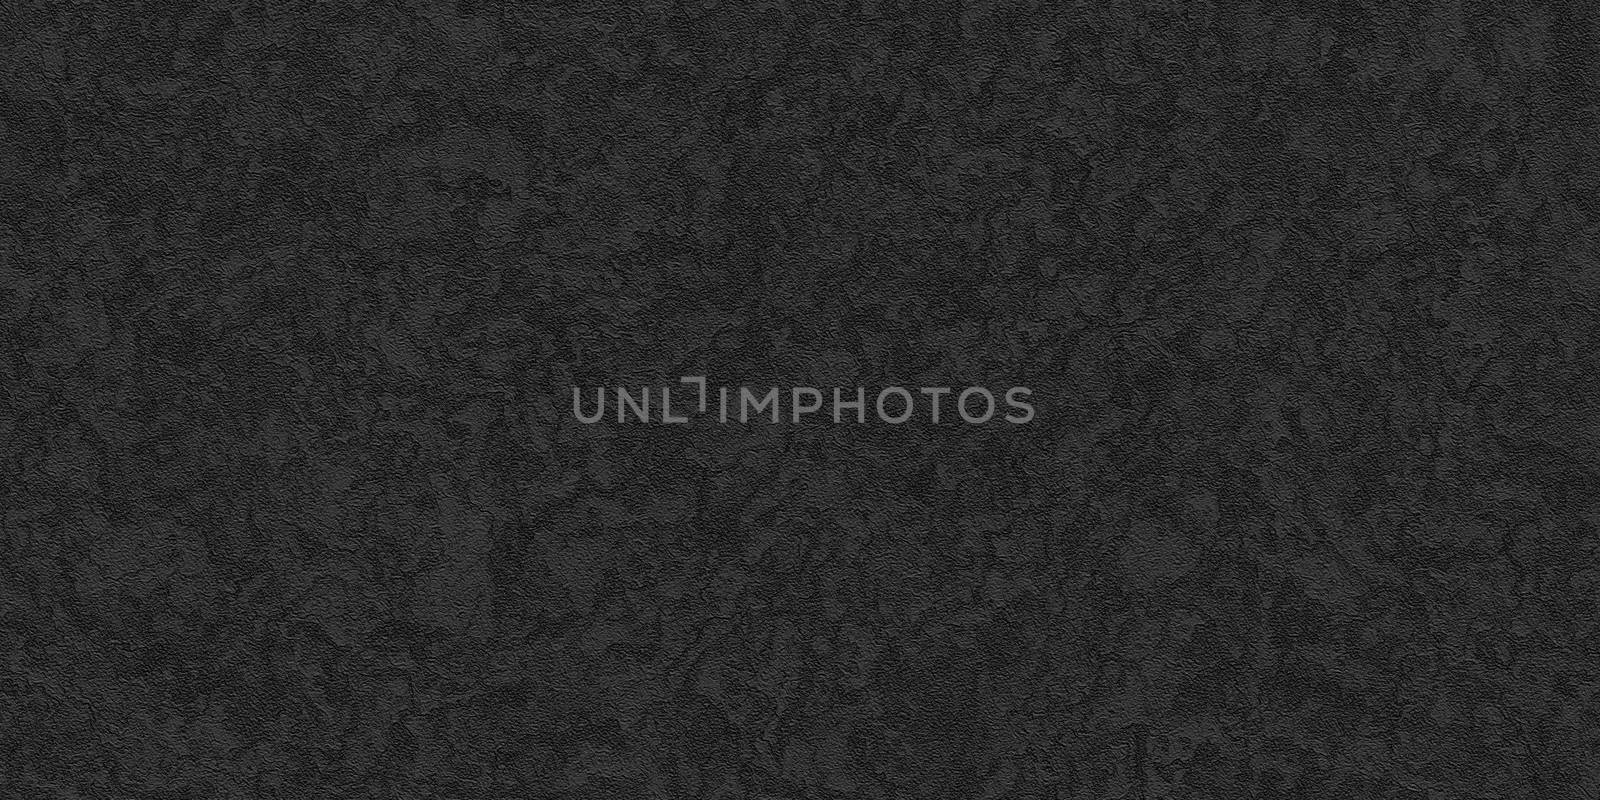 Rough Black Art Paper Seamless Texture. Blank Page Background.